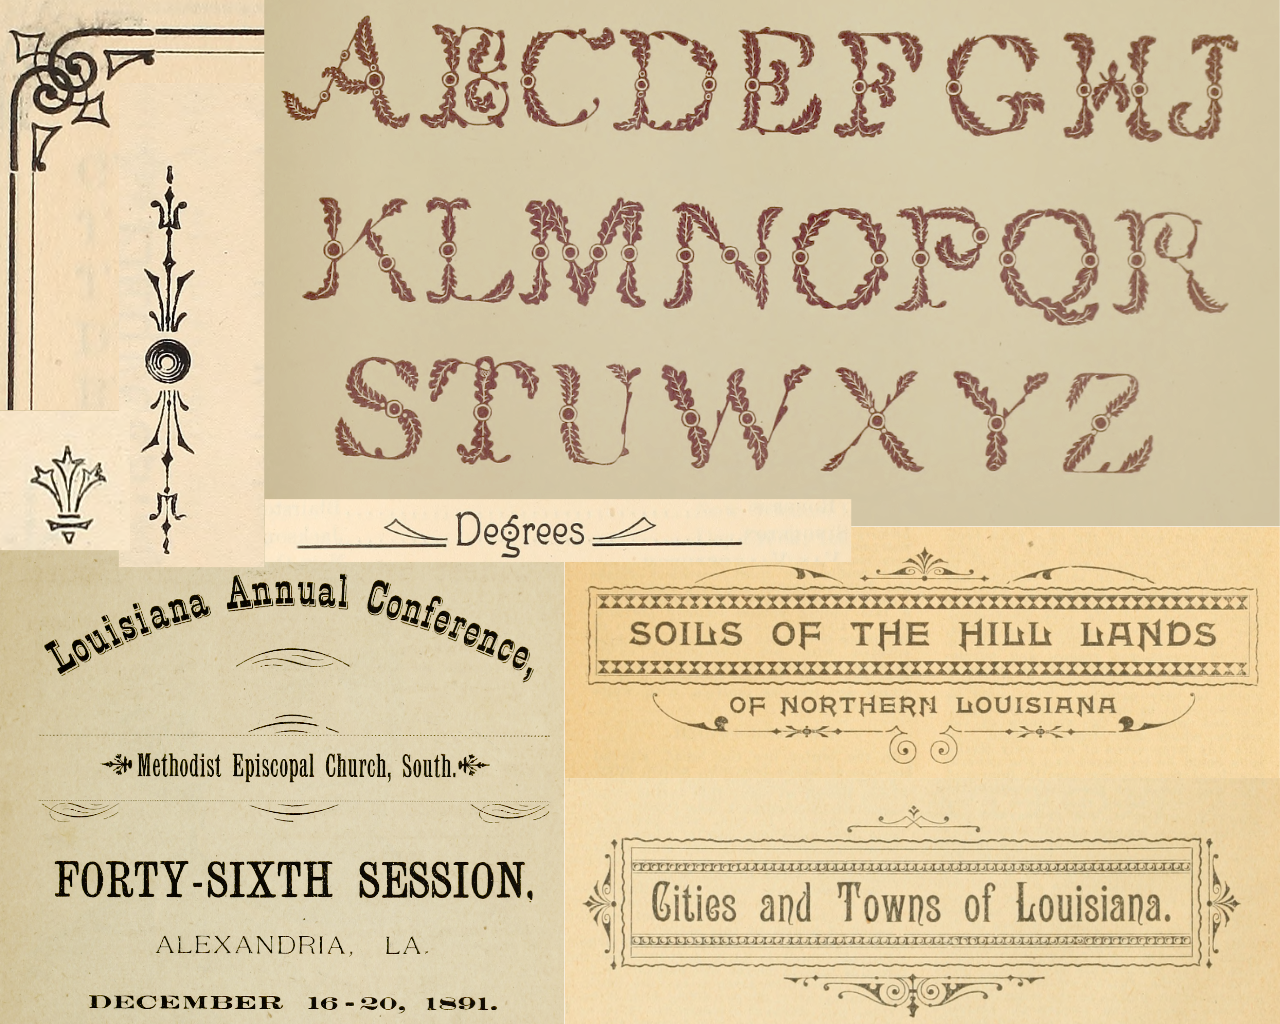 A selection of graphical flourishes and fonts from various books, including "Soils of the Hill Lands"